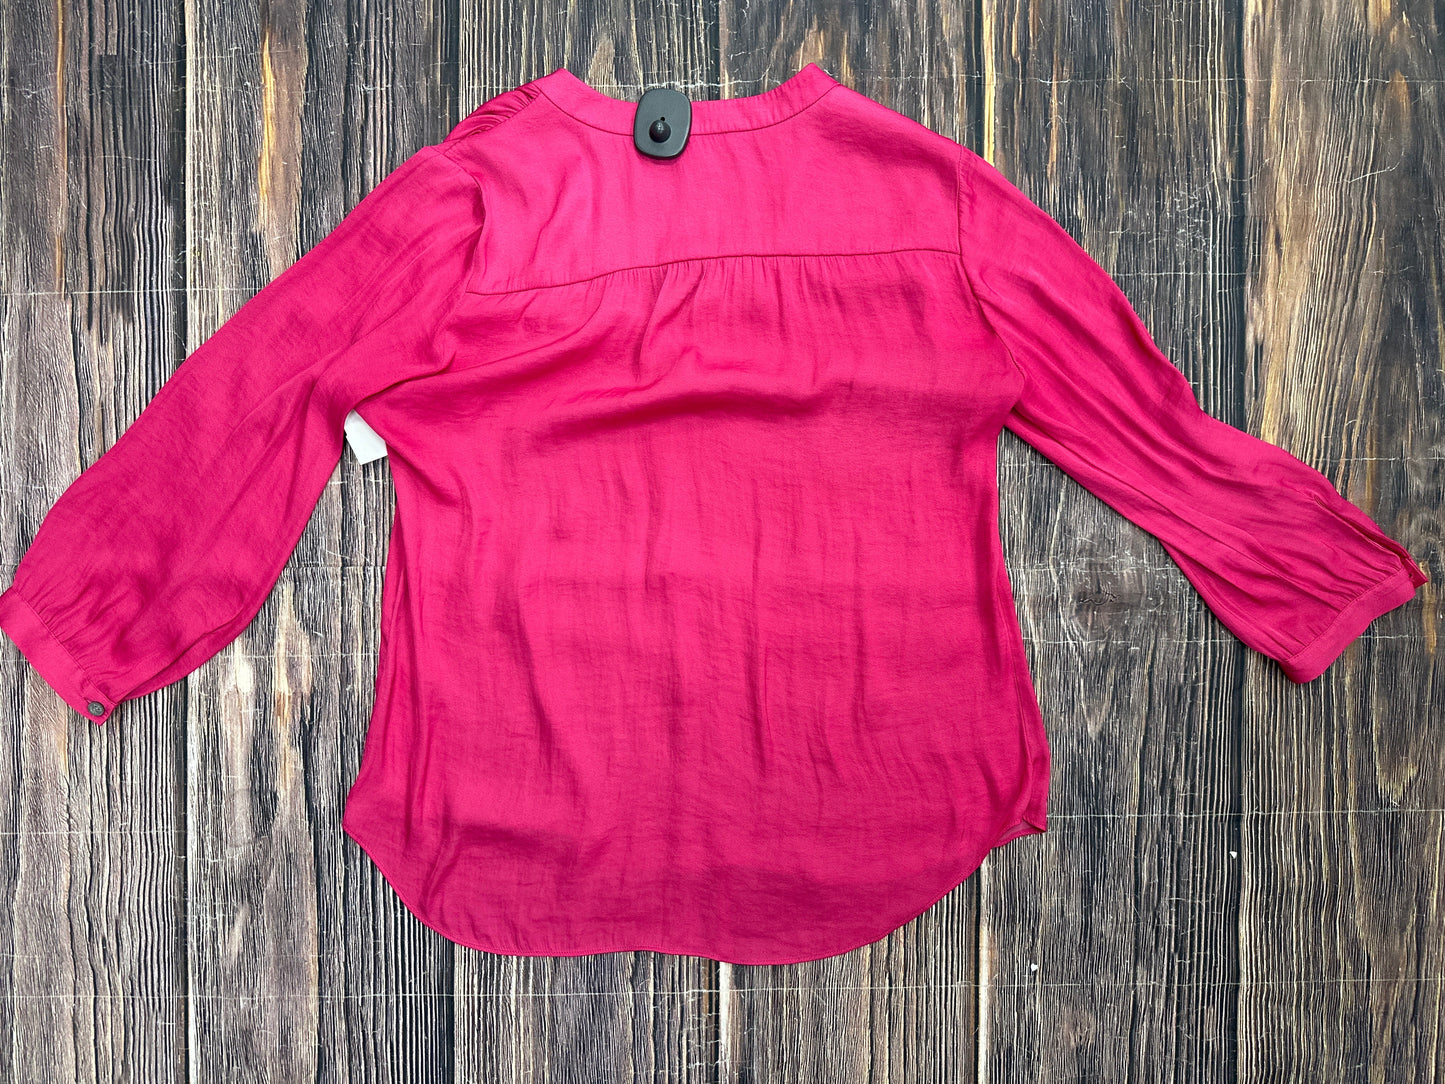 Pink Top Long Sleeve Vince Camuto, Size S